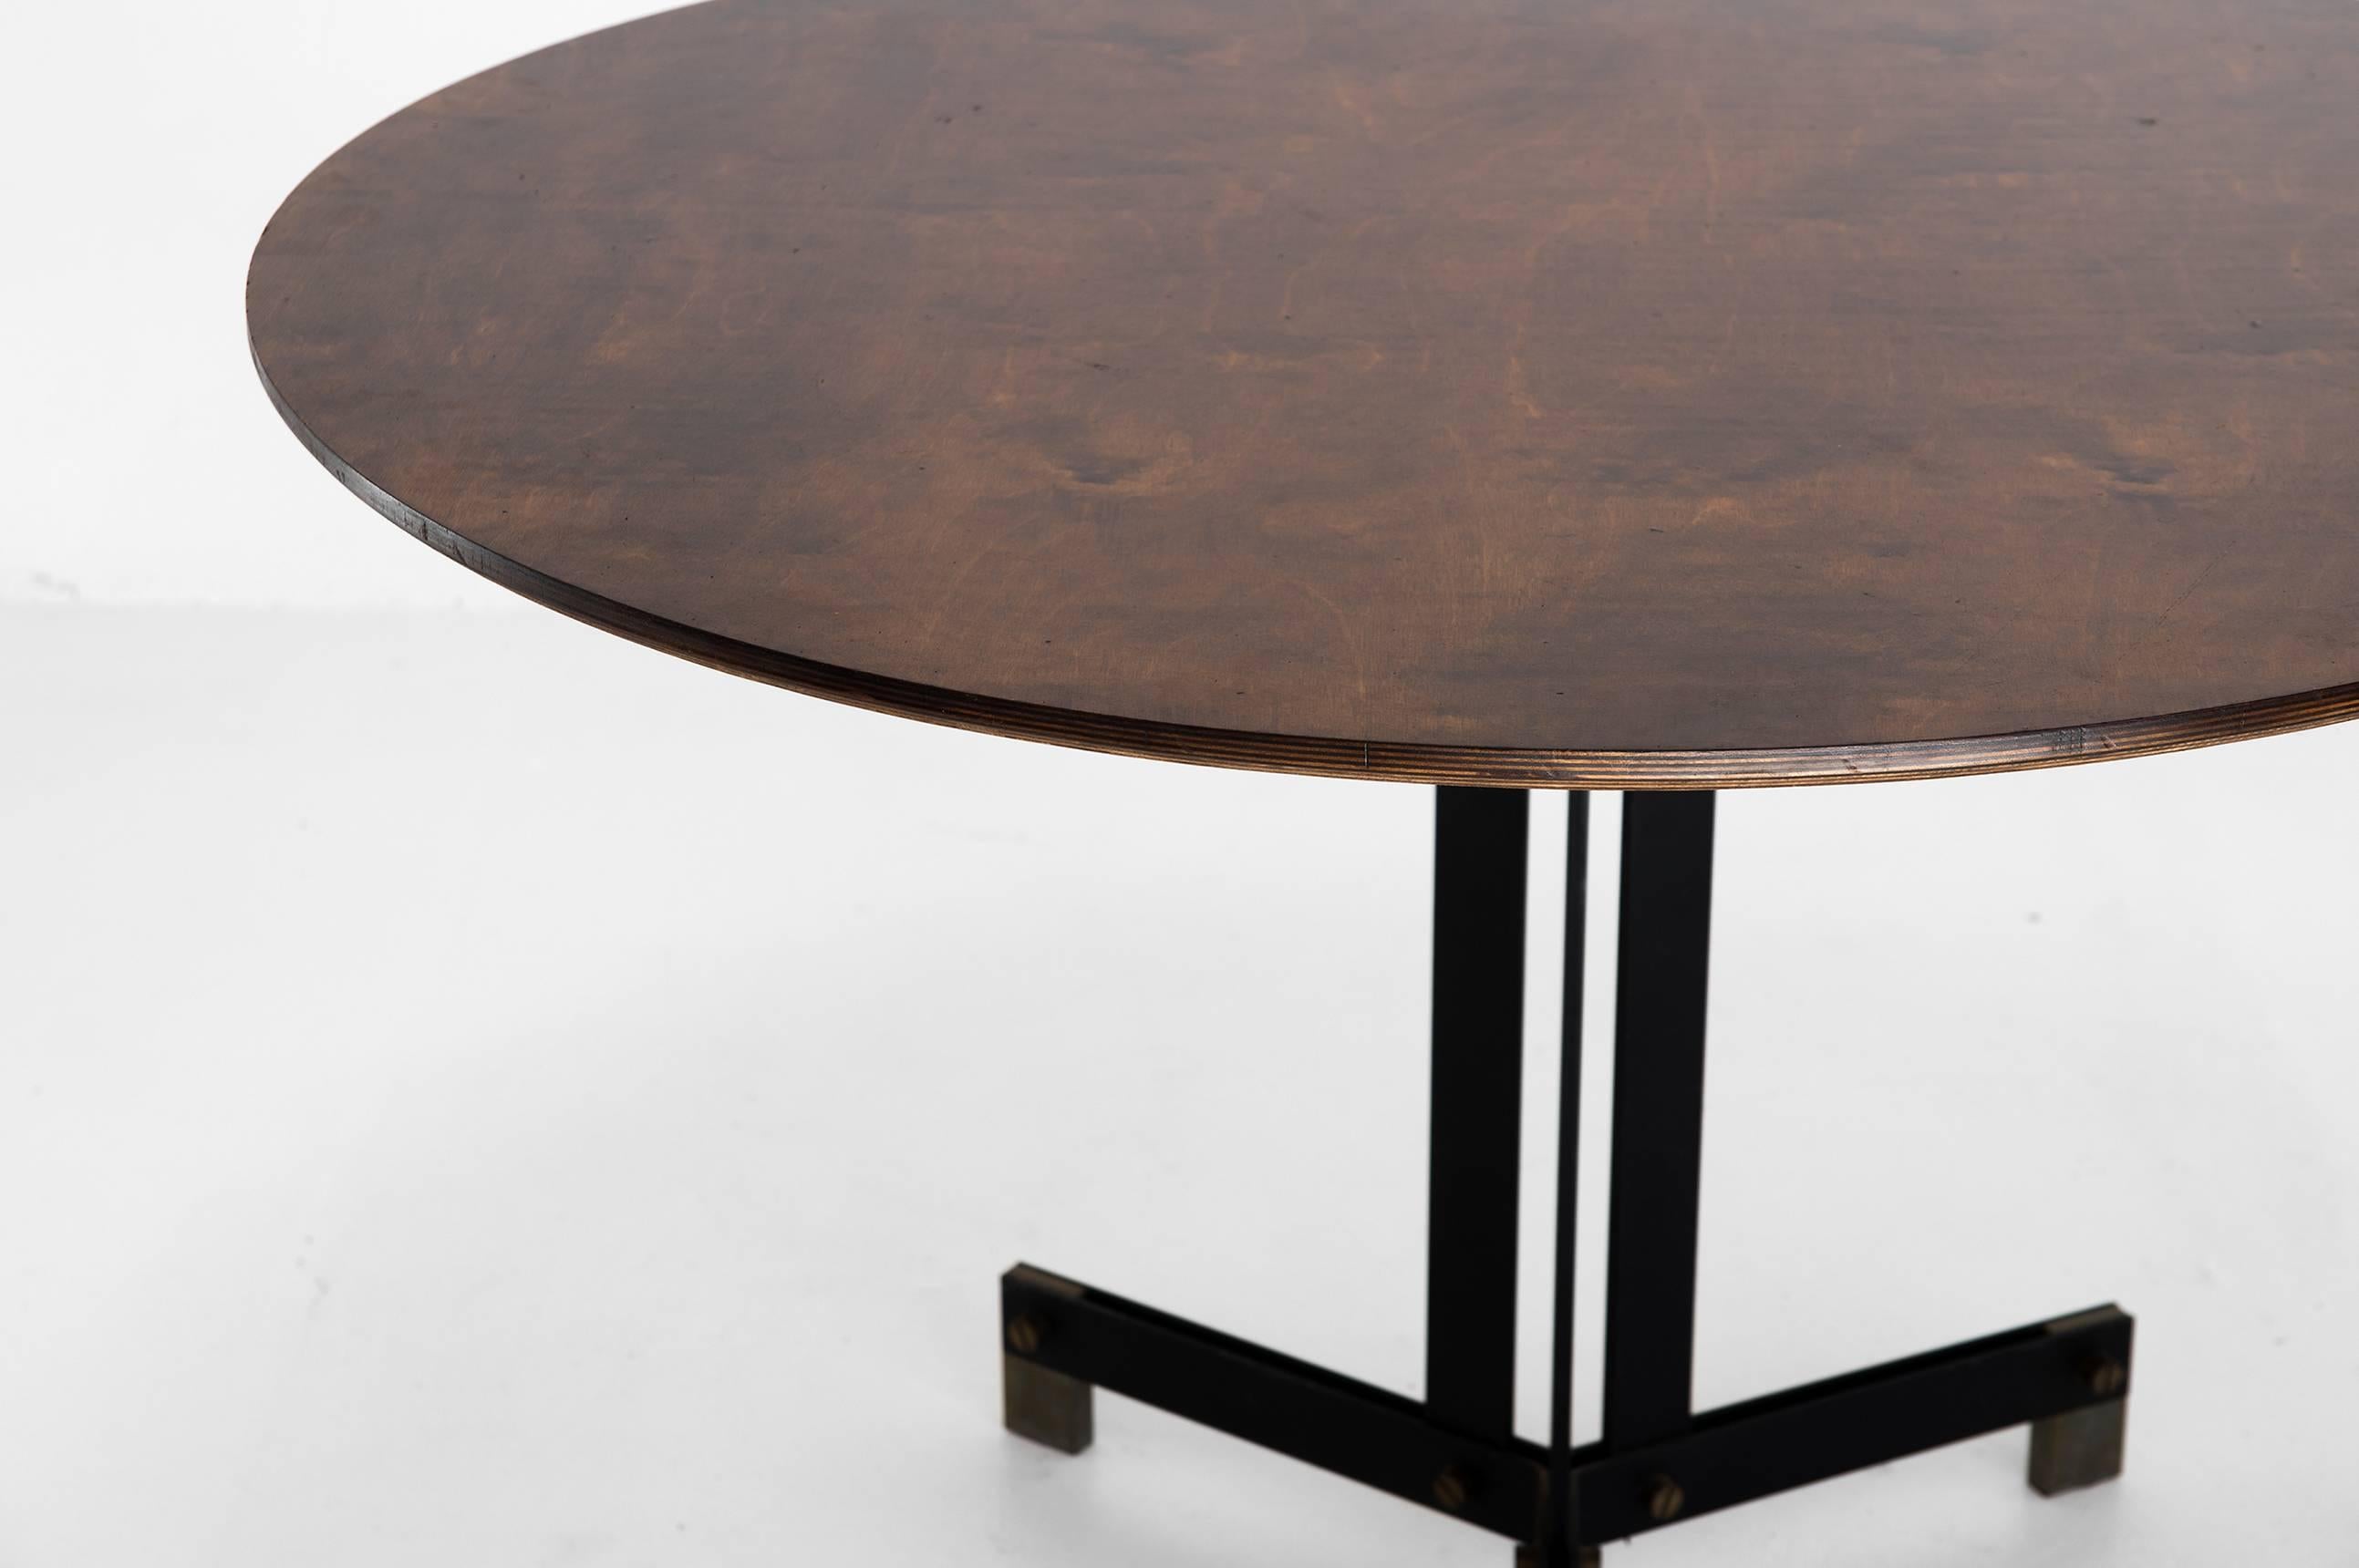 Ignazio Gardella (1905-1999)

Round Table
Round Dining Table 
Manufactured by Azucena
Italy, 1950Varnished metal and polished brass legs, wooden top

Measurements
120 cm diameter x 77 cm height
47. 2 in diameter x 30.3 in height

Literature
I.